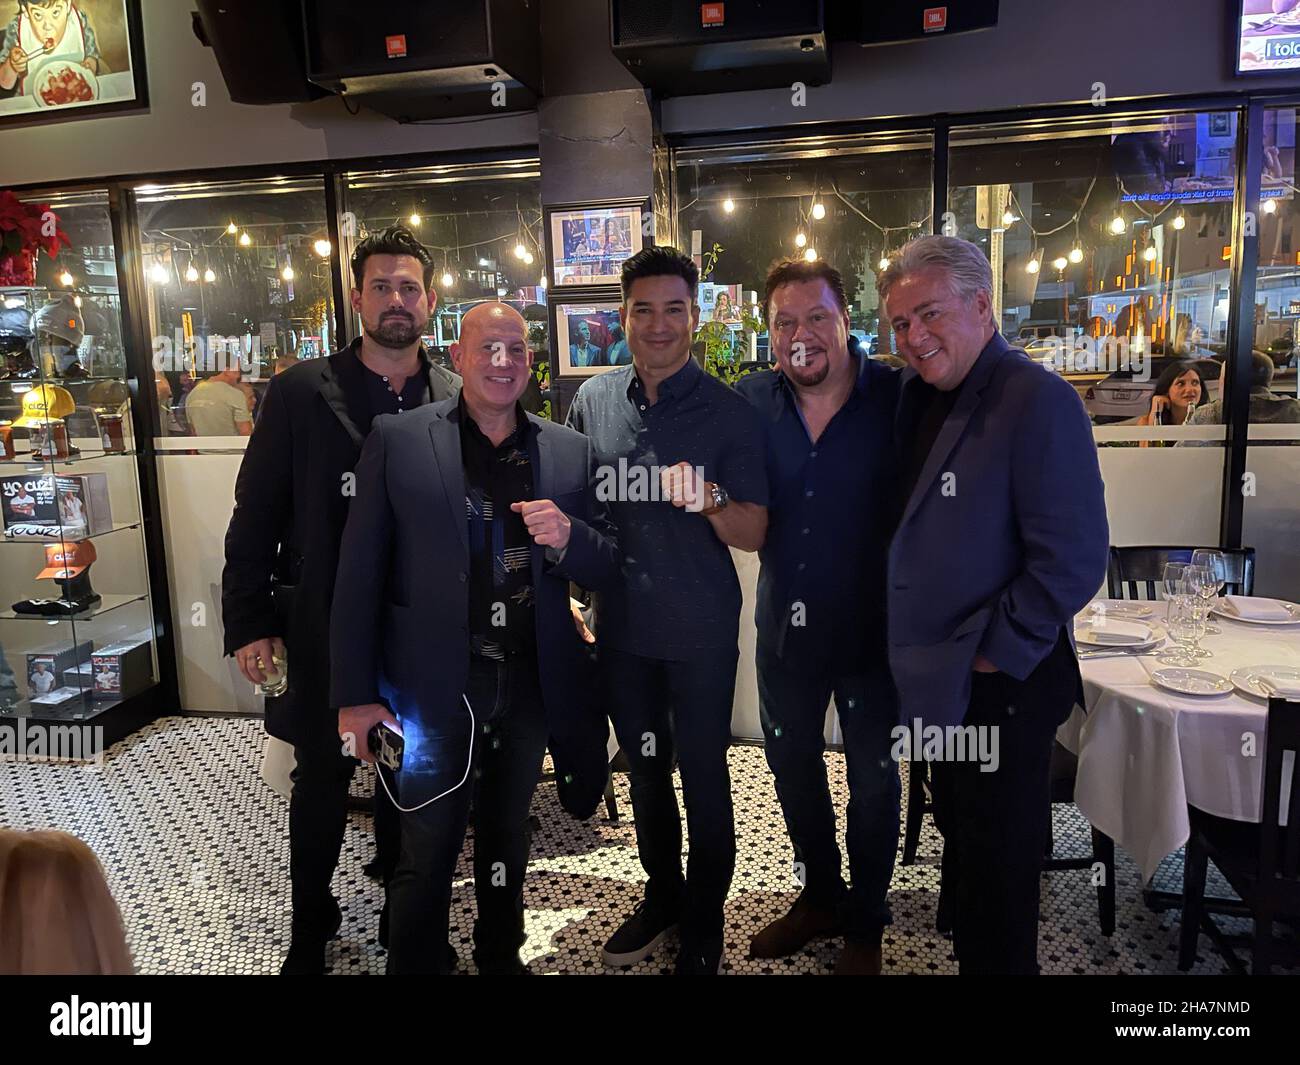 FORT LAUDERDALE; FL - DECEMBER 10: Saved by the Bell Actor, Host of Access Hollywood and the 2020 Miss Universe contest Mario Lopez Along with world champion Boxer Paulie Malignaggi, Gravesend Director and Actor William DeMeo join cook, actor and Owner Steve Martorano The 'Godfather of Italian-American cooking' December 10, 2021 At Cafe Martorano in Fort Lauderdale, Florida People: Mario Lopez . Credit: hoo-me.com/MediaPunch Stock Photo